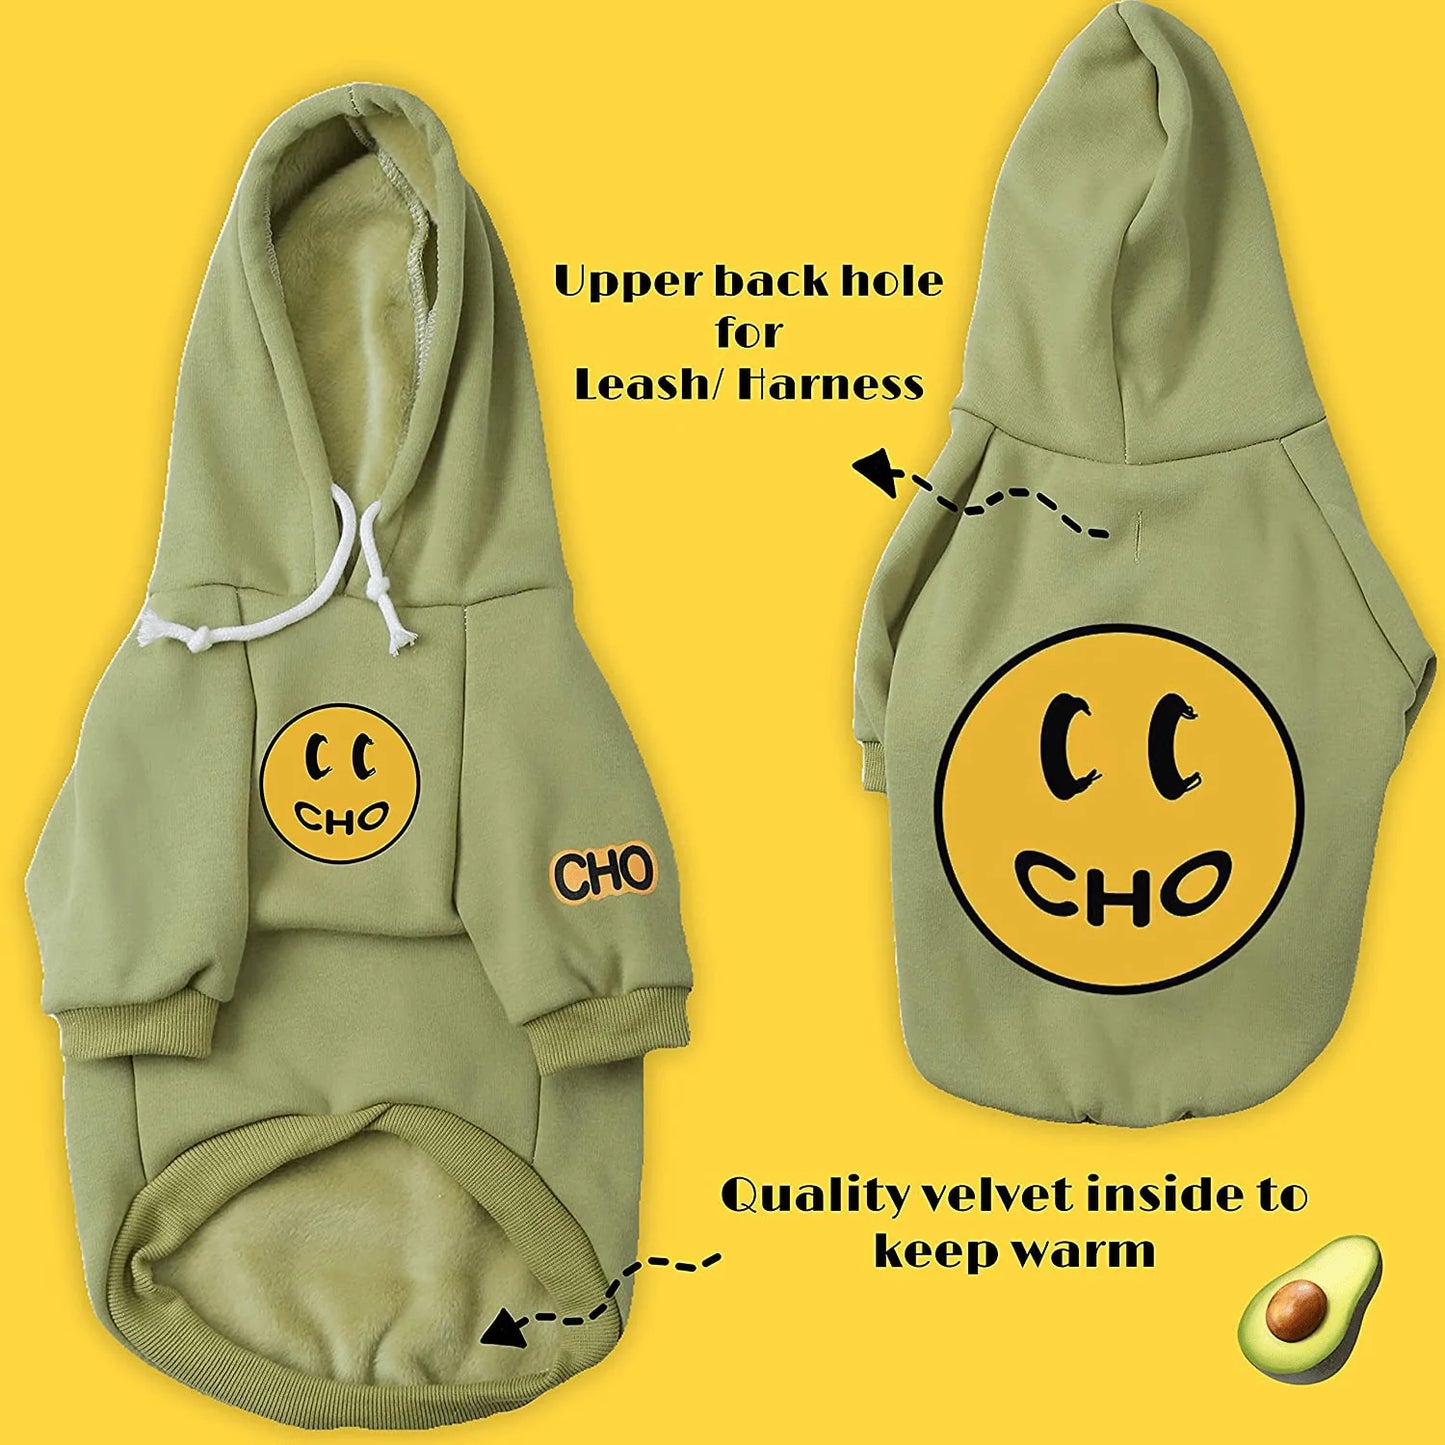 Chochocho Smile Dog Hoodie, Smiley Face Dog Sweater, Stylish Dog Clothes, Cotton Sweatshirt for Dogs and Puppies, Fashion Outfit for Dogs Cats Puppy Small Medium Large Animals & Pet Supplies > Pet Supplies > Dog Supplies > Dog Apparel ChoChoCho Pet Supplies   